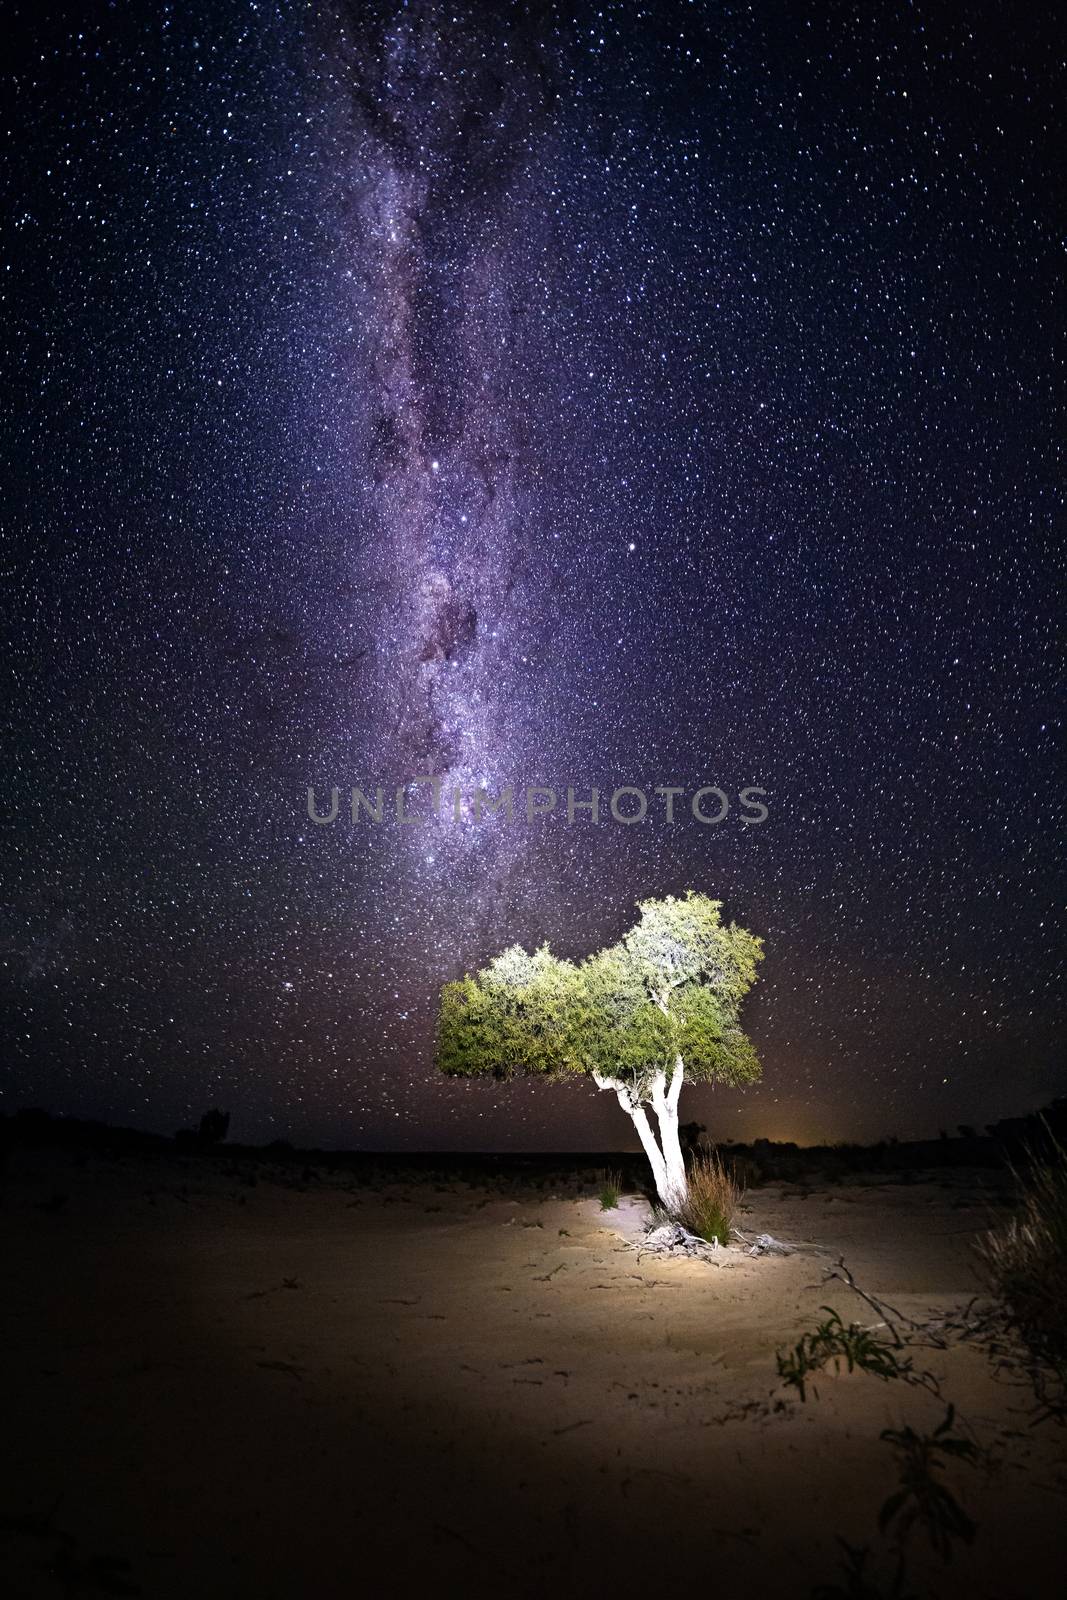 Lone tree in the Australian outback desert under a sky full of a billion stars, the galactic core of the milky way universe